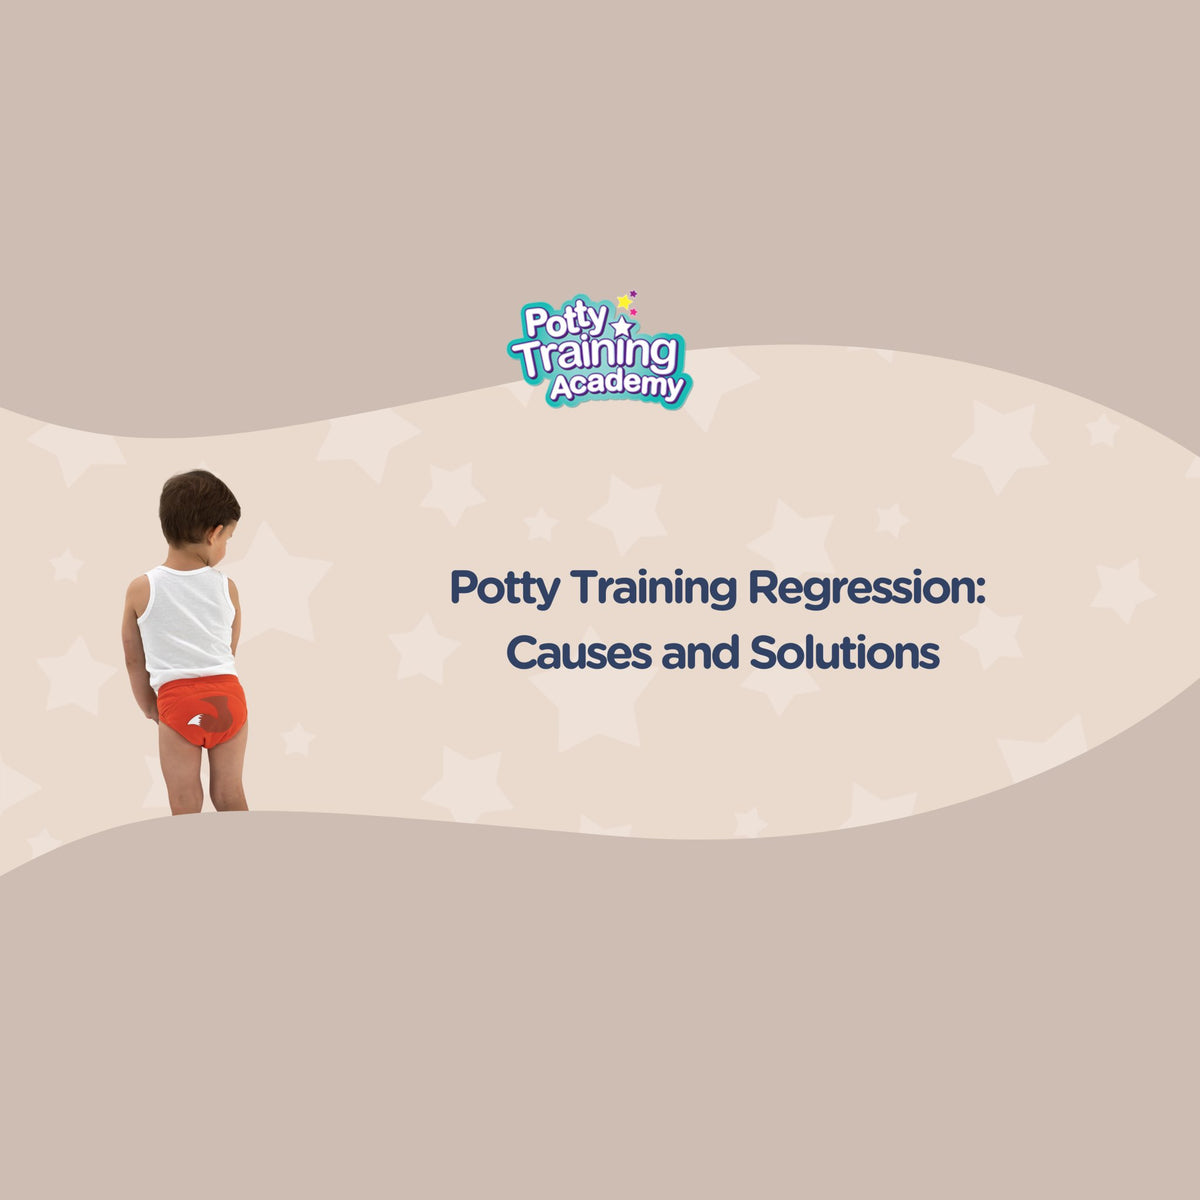 Potty Training Regression: 5 Tips to Get Back on Track